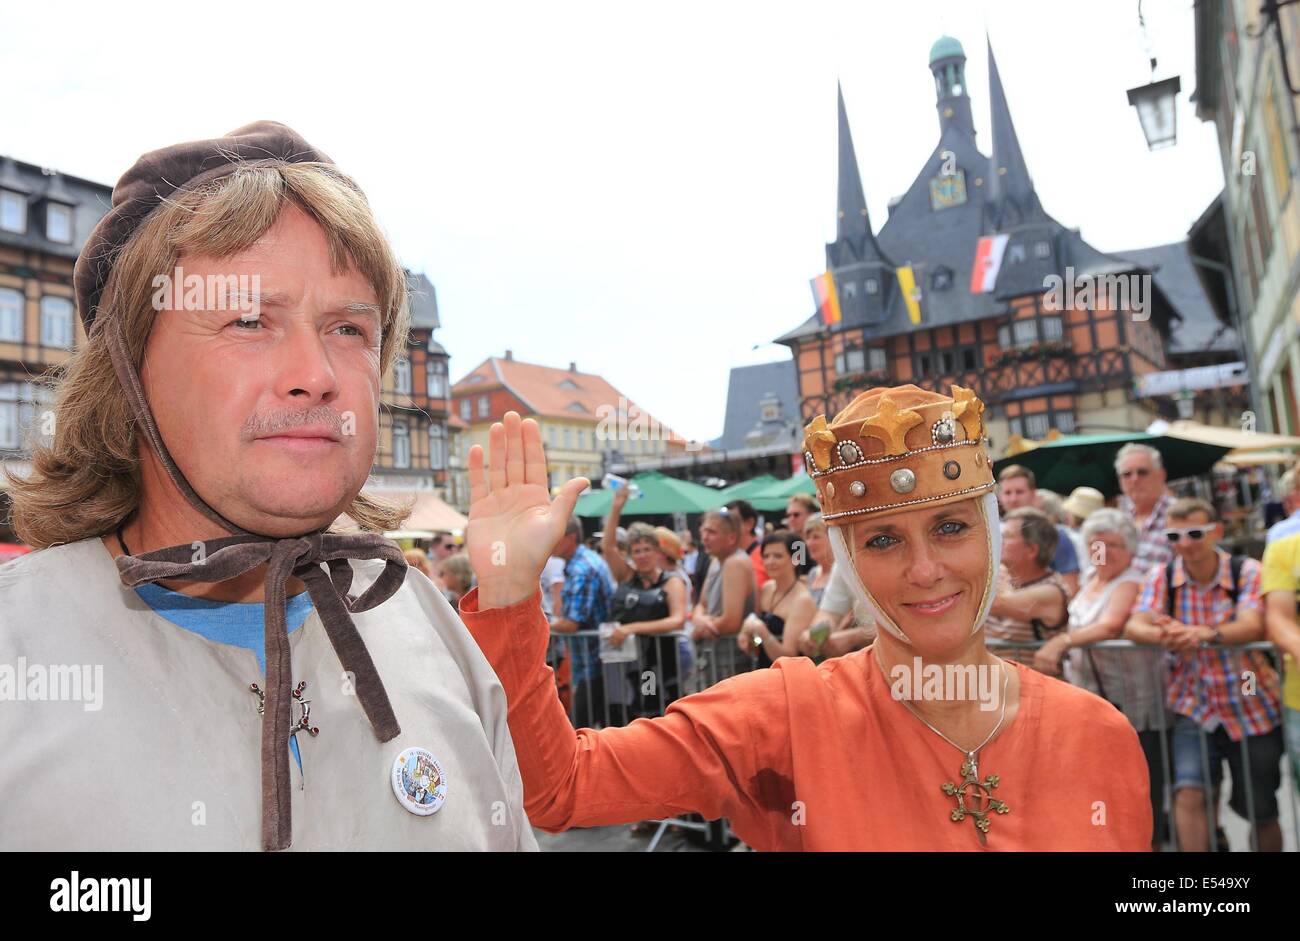 Wernigerode, Germany. 20th July, 2014. Actors portraying the Naumburg Master donor portraits Eckhard II and Uta take part in the festival parade during the 18th Saxony-Anhalt Day in Wernigerode, Germany, 20 July 2014. The parade in the Harz Mountain town is the highlight of the three day state festival. Photo: JENS WOLF/dpa/Alamy Live News Stock Photo